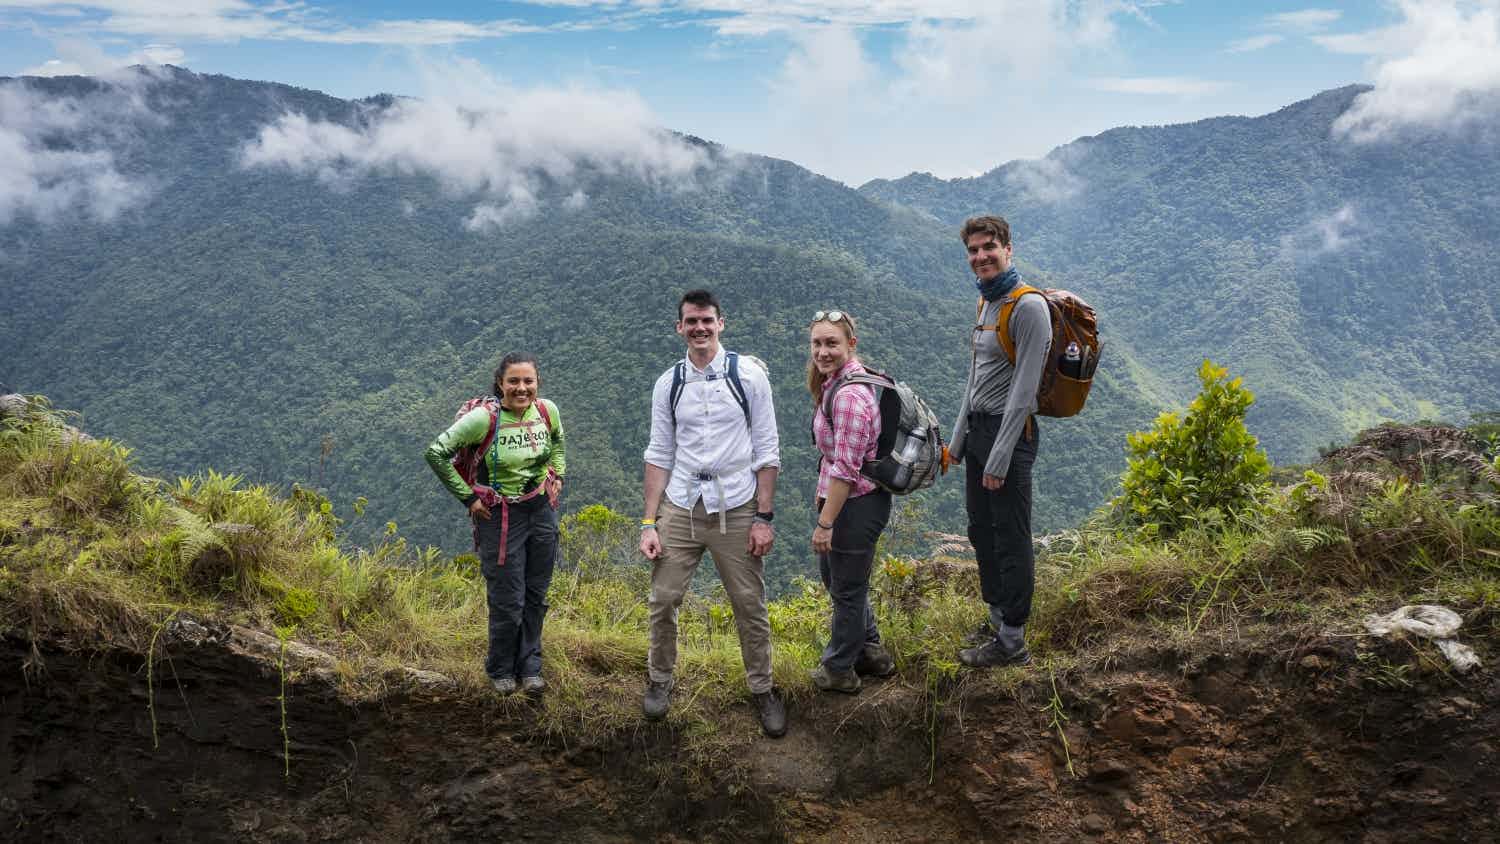 Hikers in the Samana Watershed. Photo: Expedition Colombia.